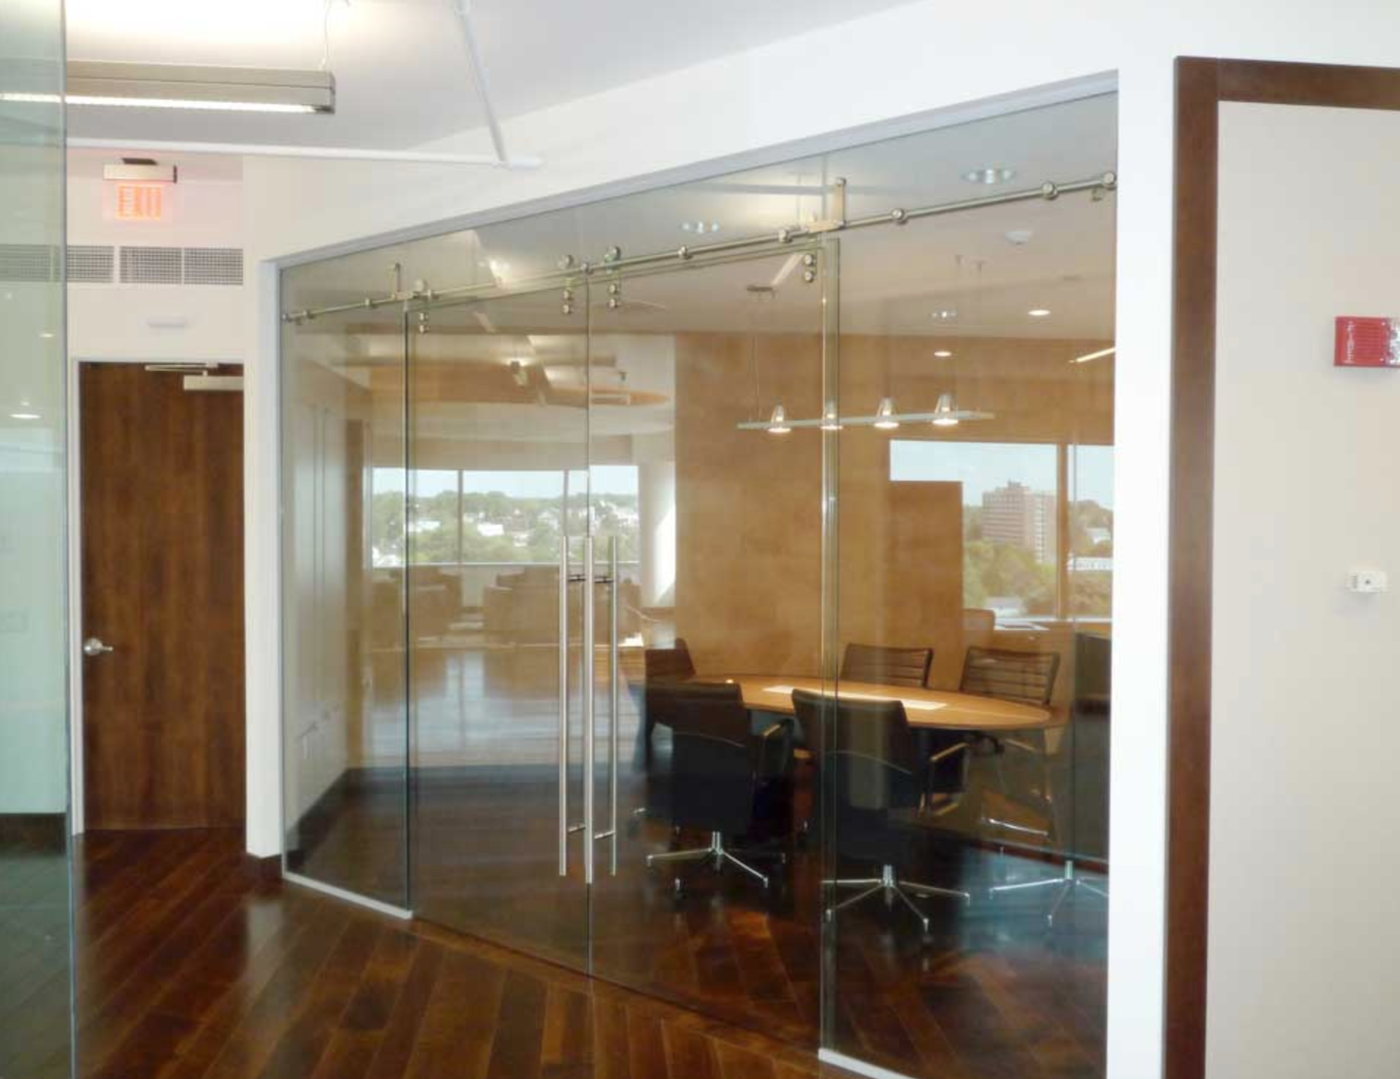 Office Cubicles with Sliding Doors — A Growing Trend | Avanti Systems